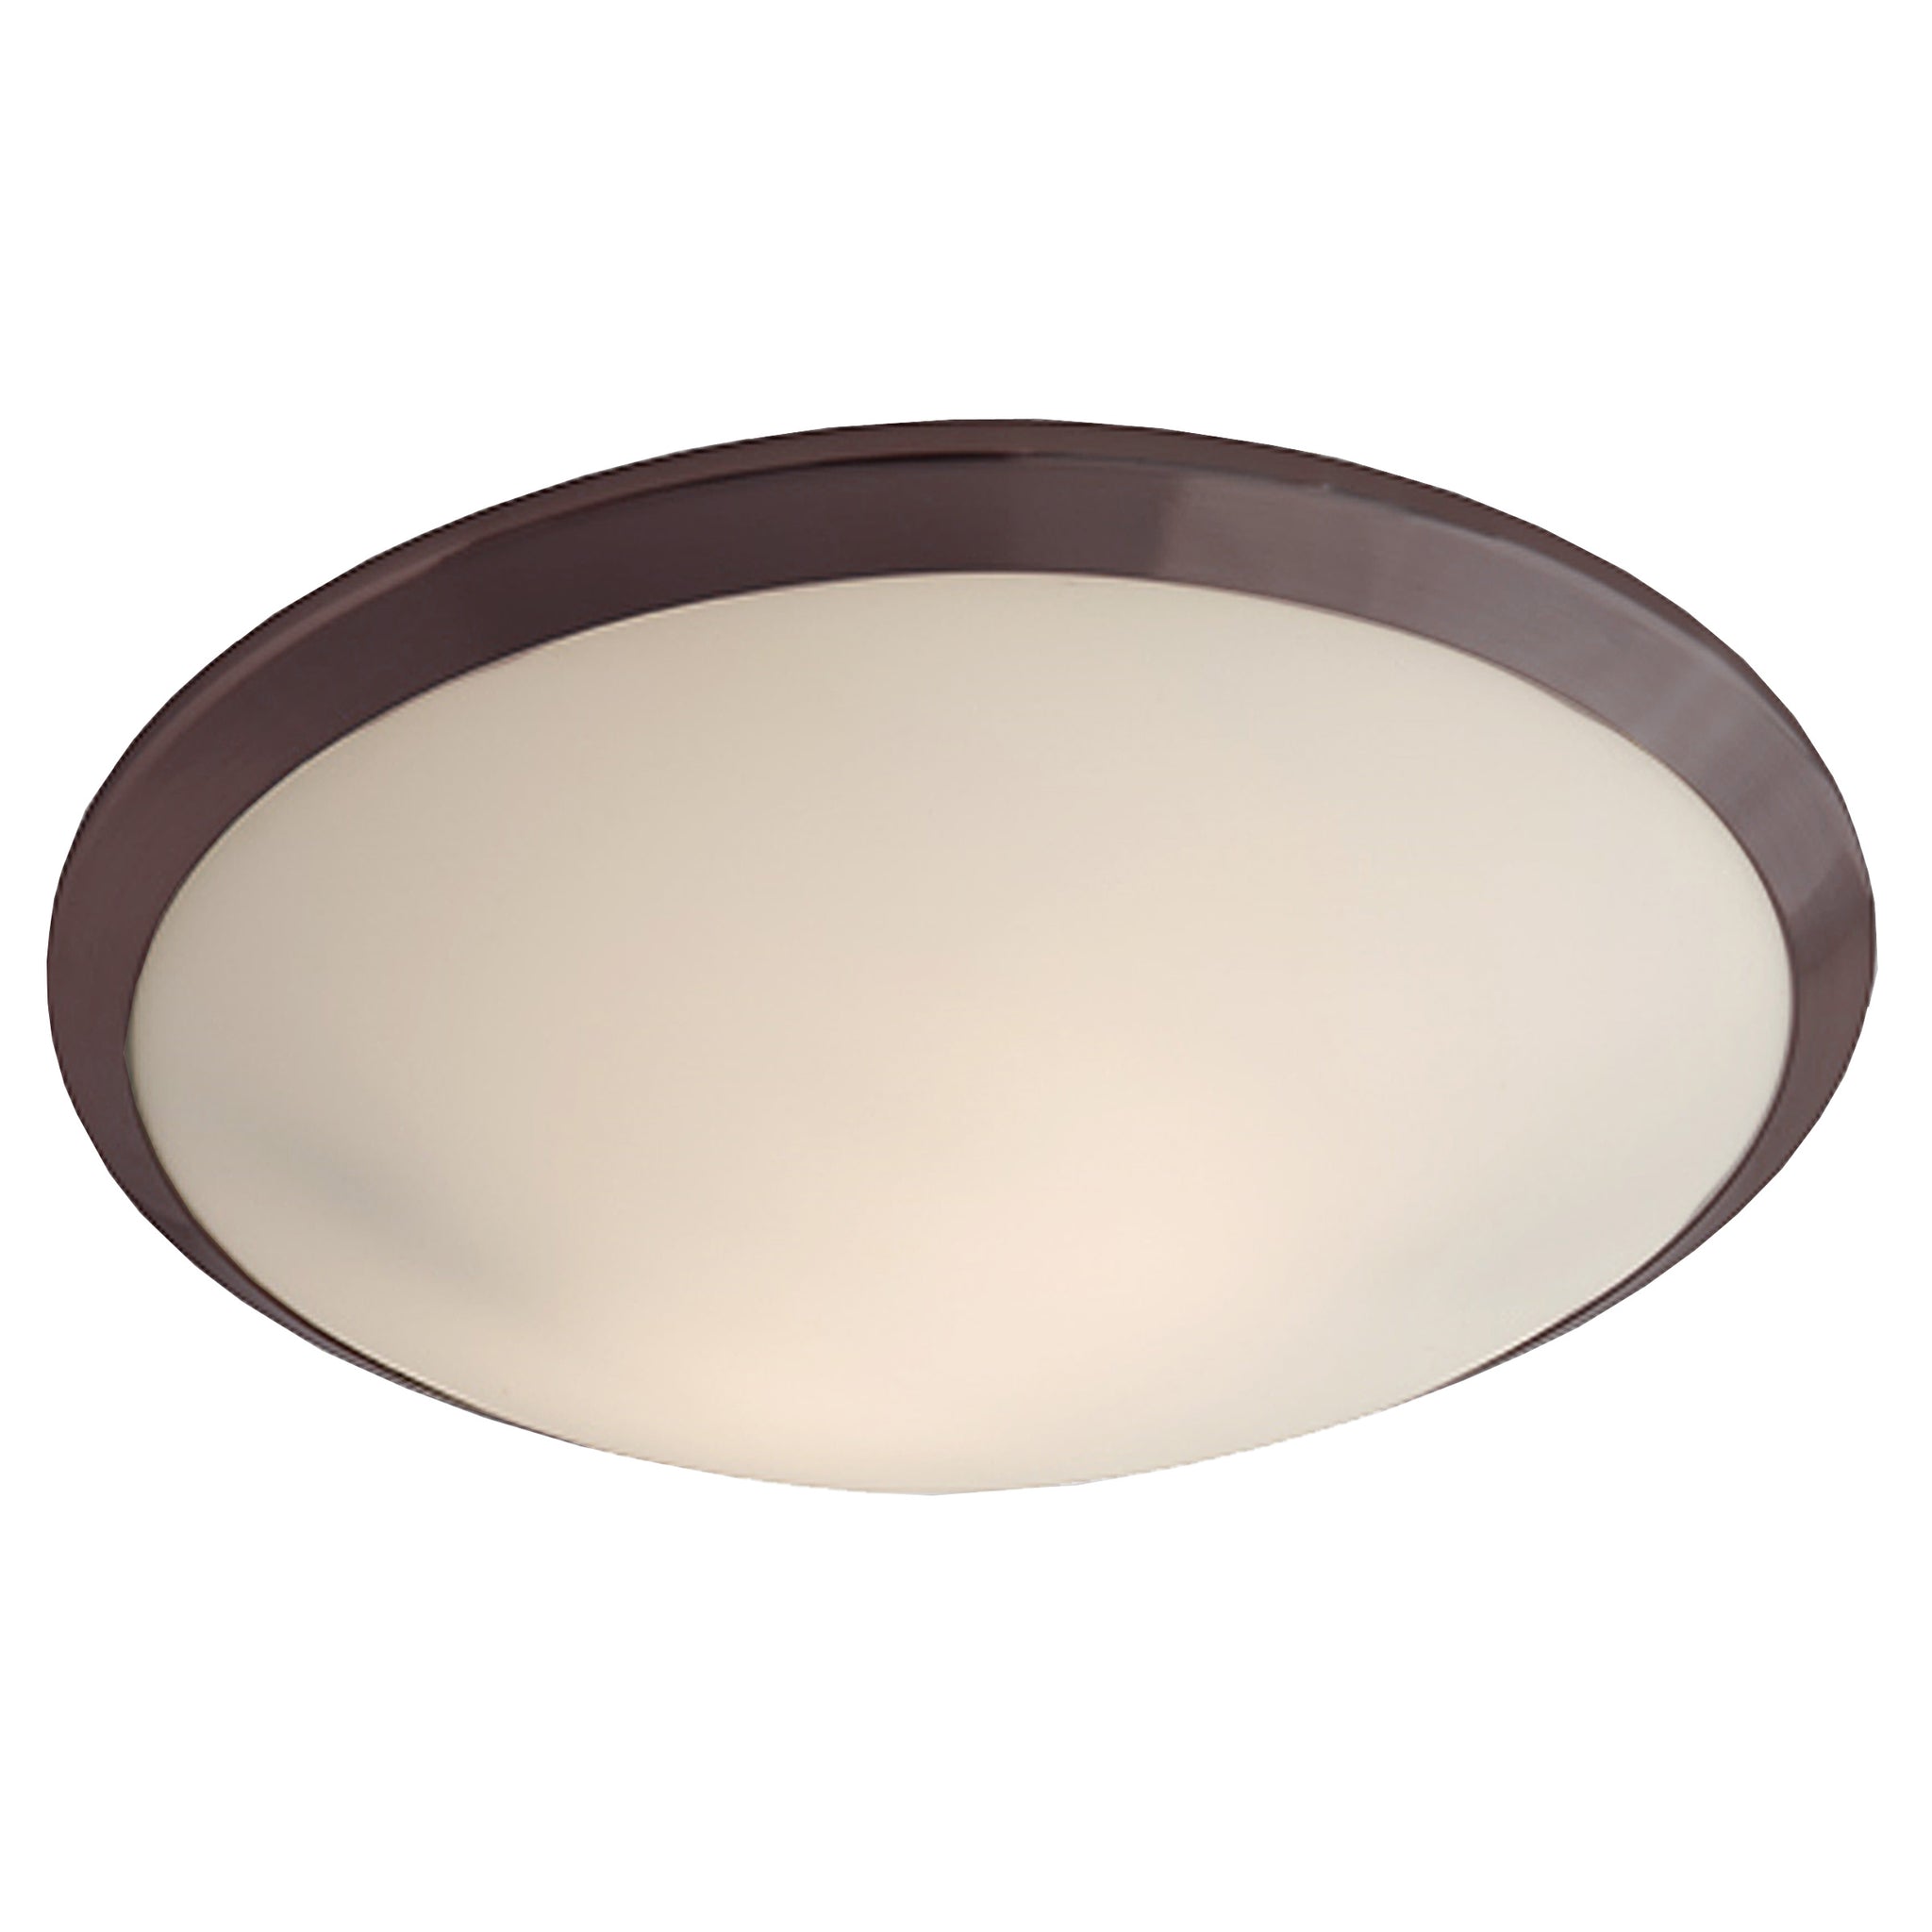 Essex Flush Mount Oil Rubbed Bronze with Half Opal Glass